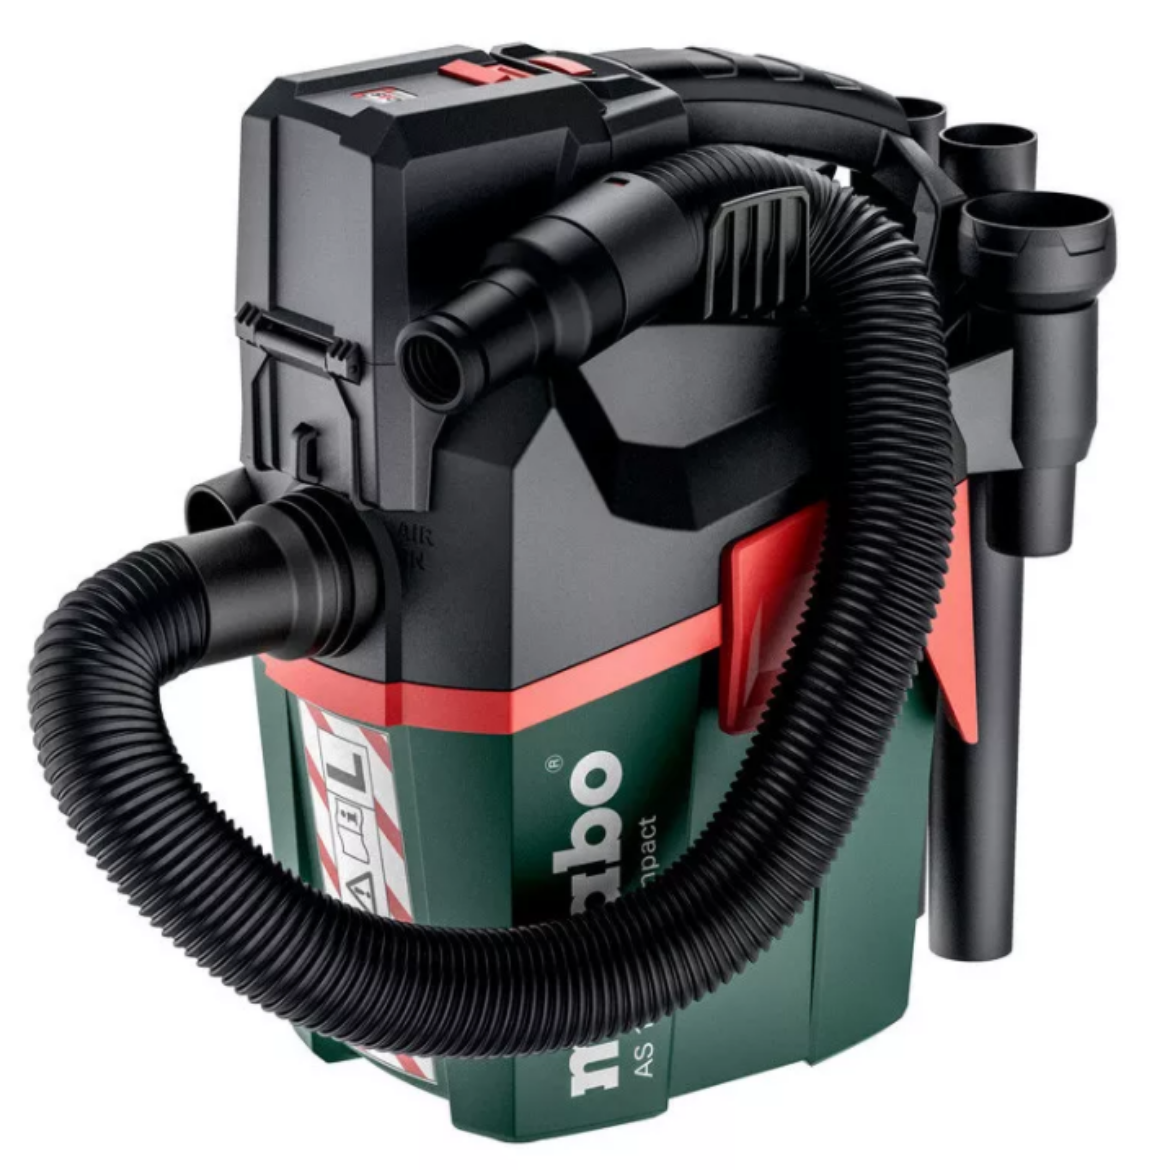 Picture of METABO 18V CORDLESS VACUUM CLEANER 6L - AS 18 L PC - SKIN ONLY